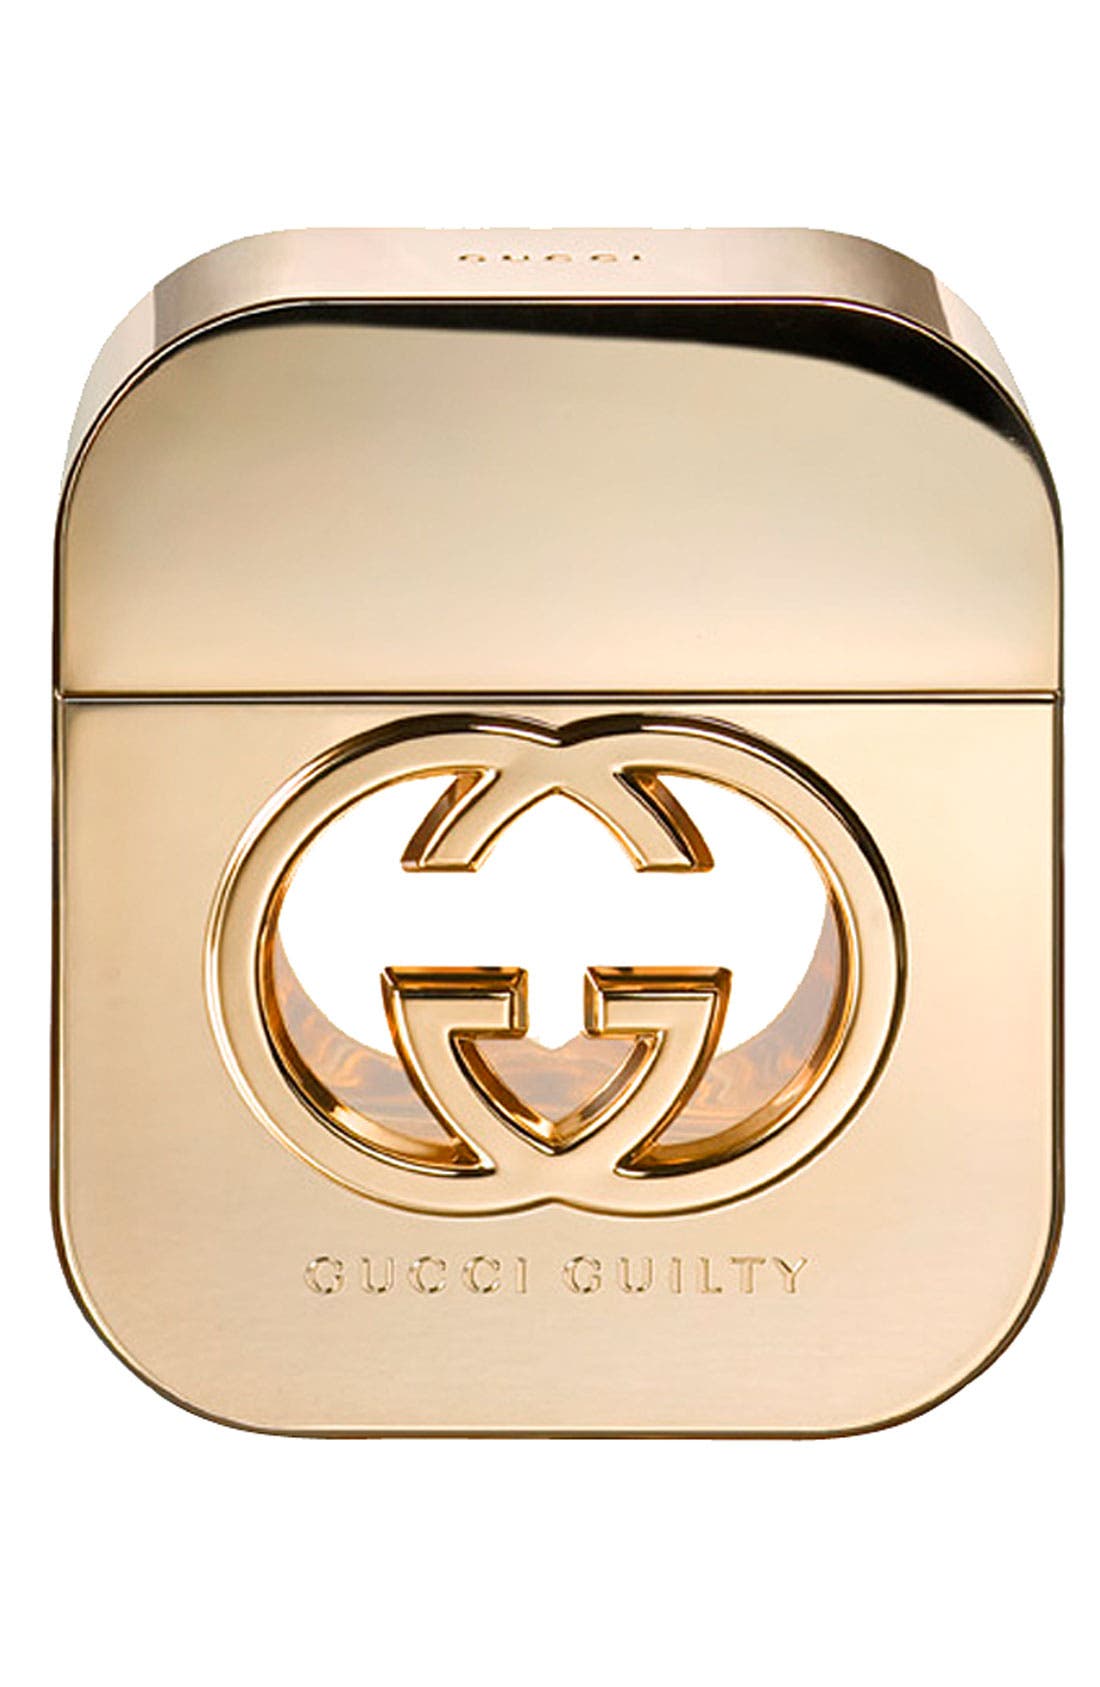 gucci guilty nordstrom